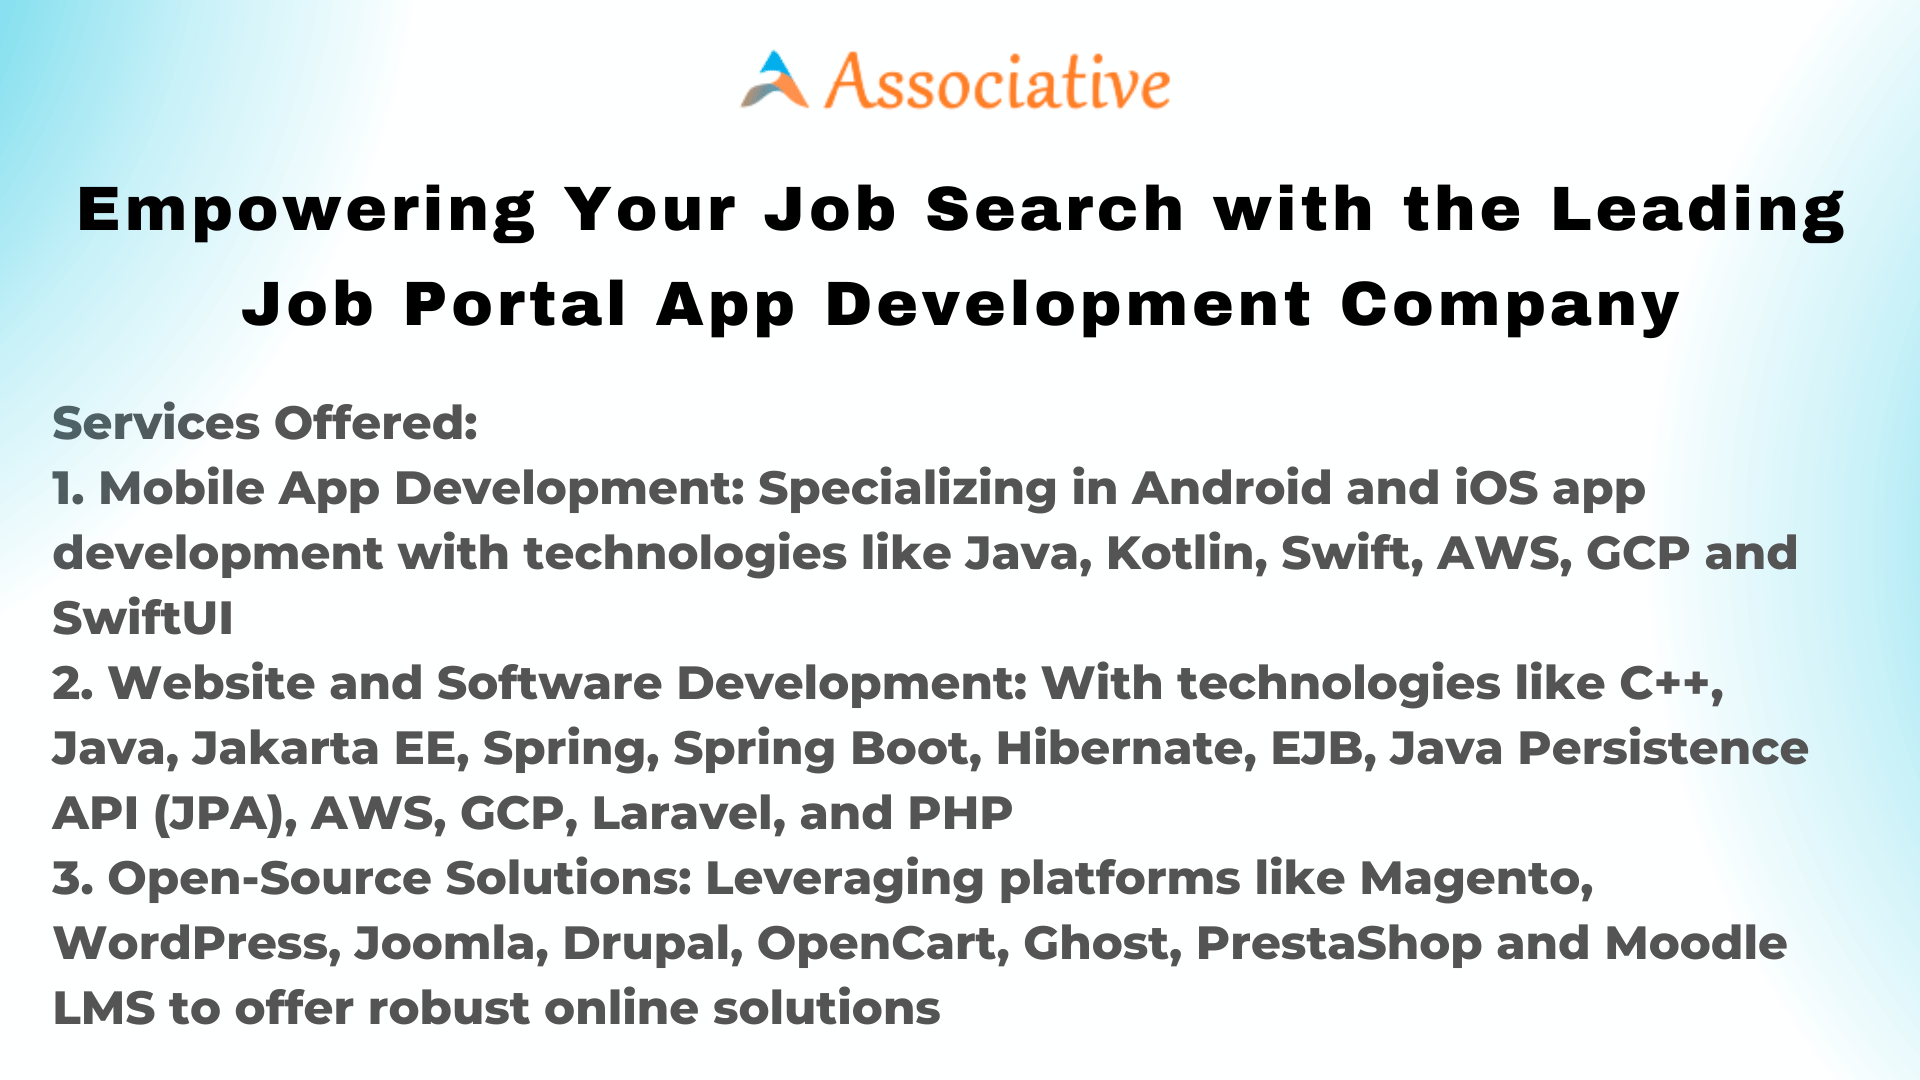 Empowering Your Job Search with the Leading Job Portal App Development Company